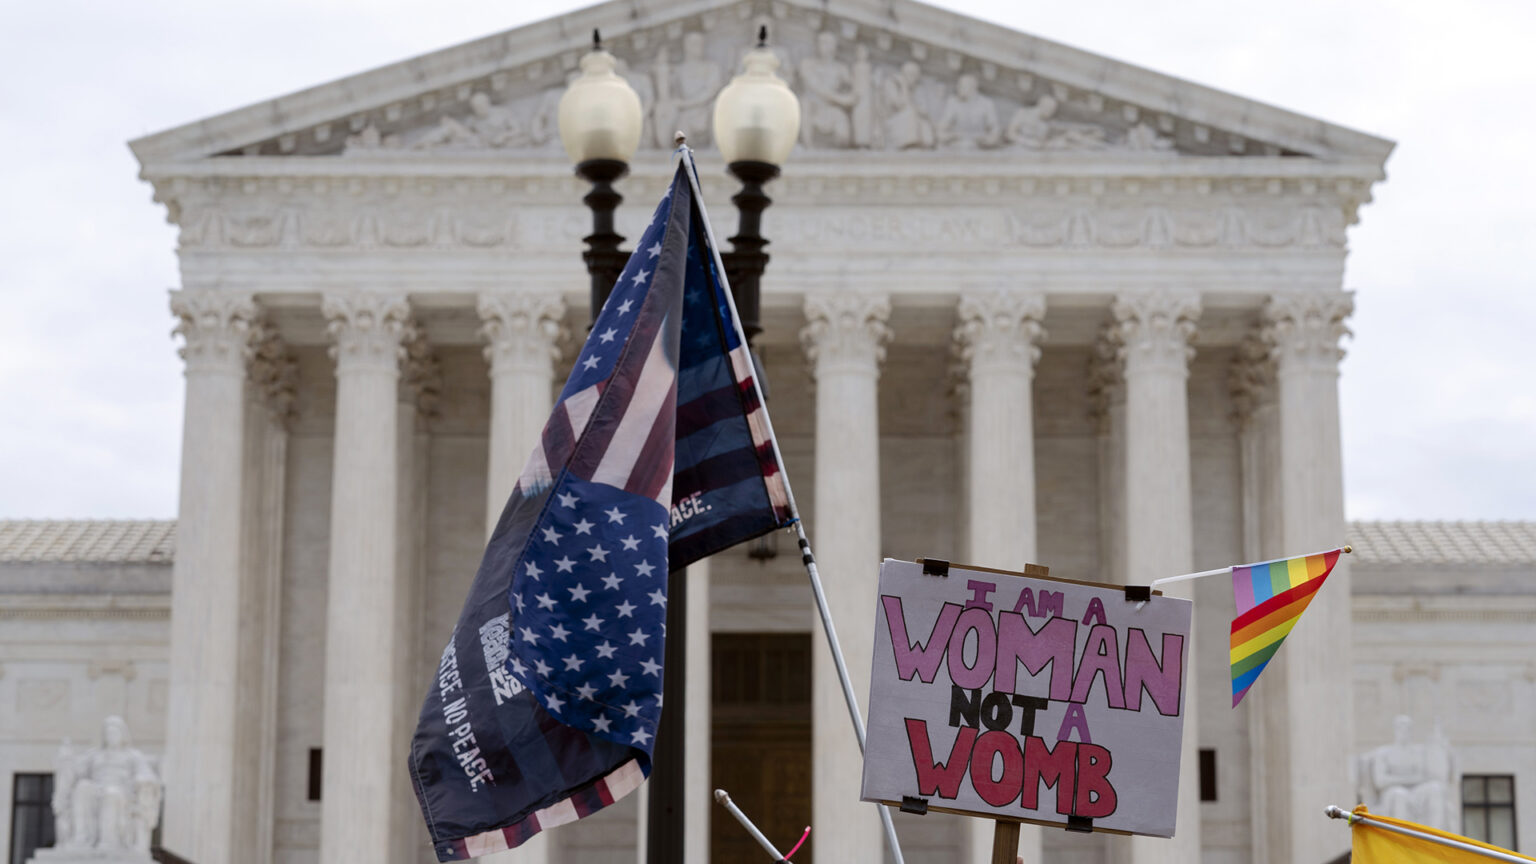 Signs and flags are held in the air in front of the U.S. Supreme Court building.